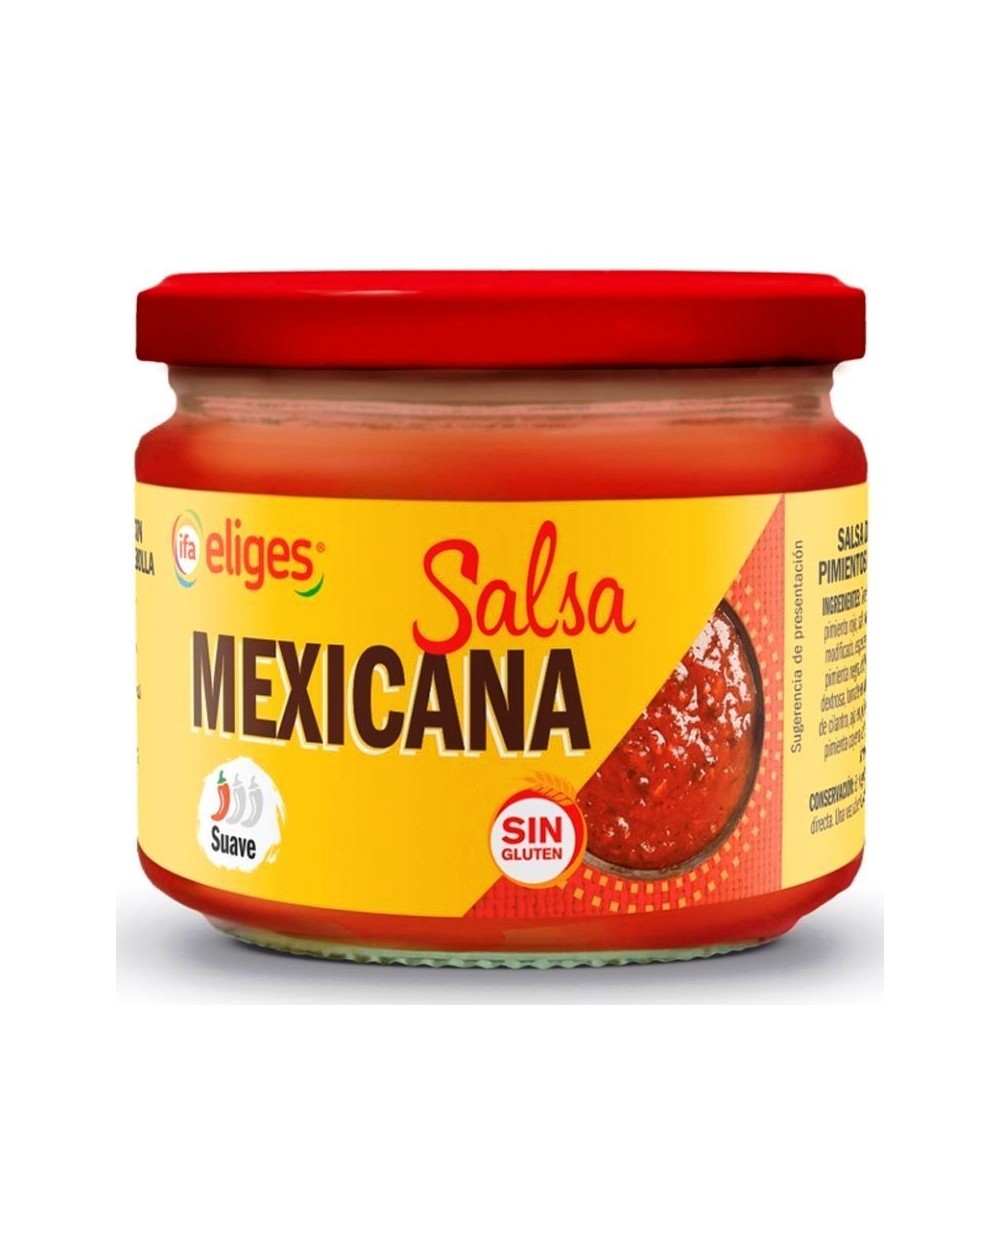 SALSA MEXICANA IFA ELIGES 300g.